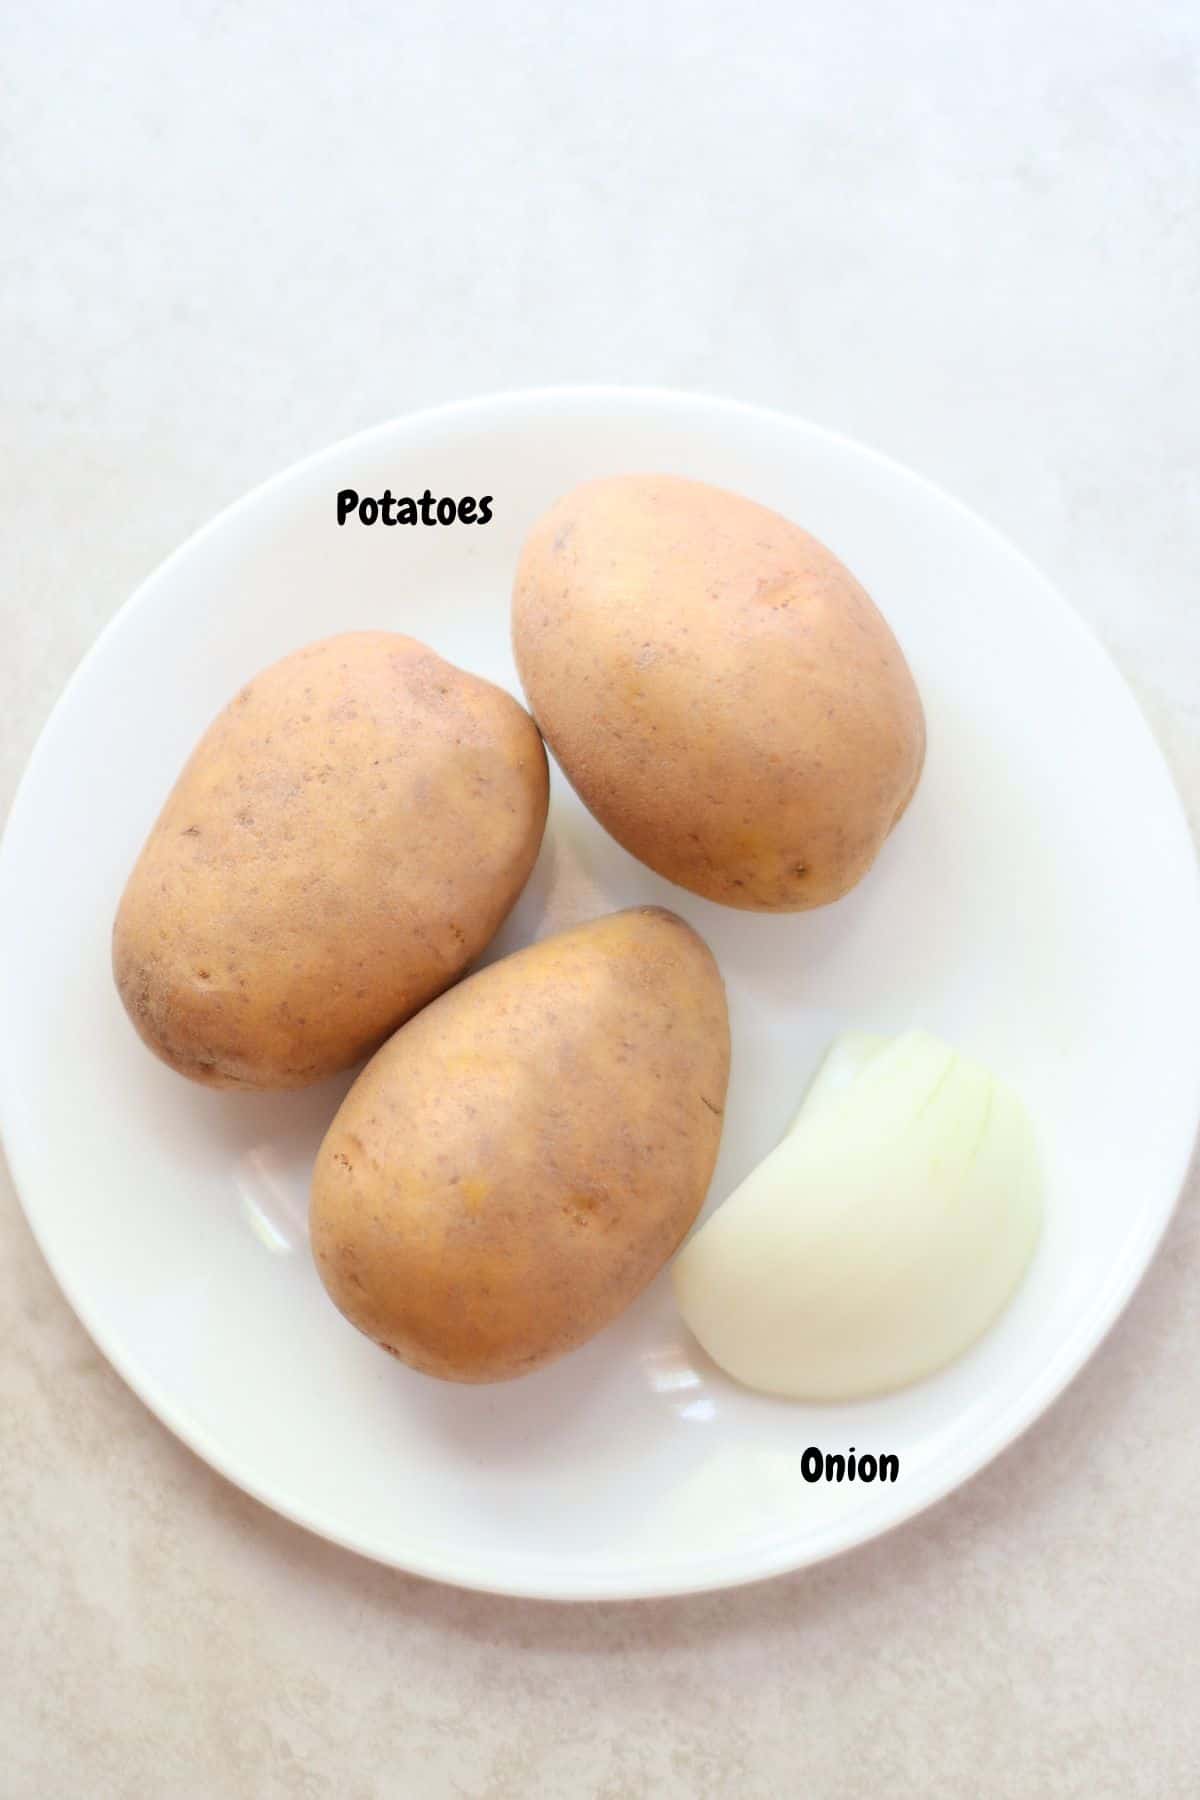 3 potatoes and half of an onion on a plate.